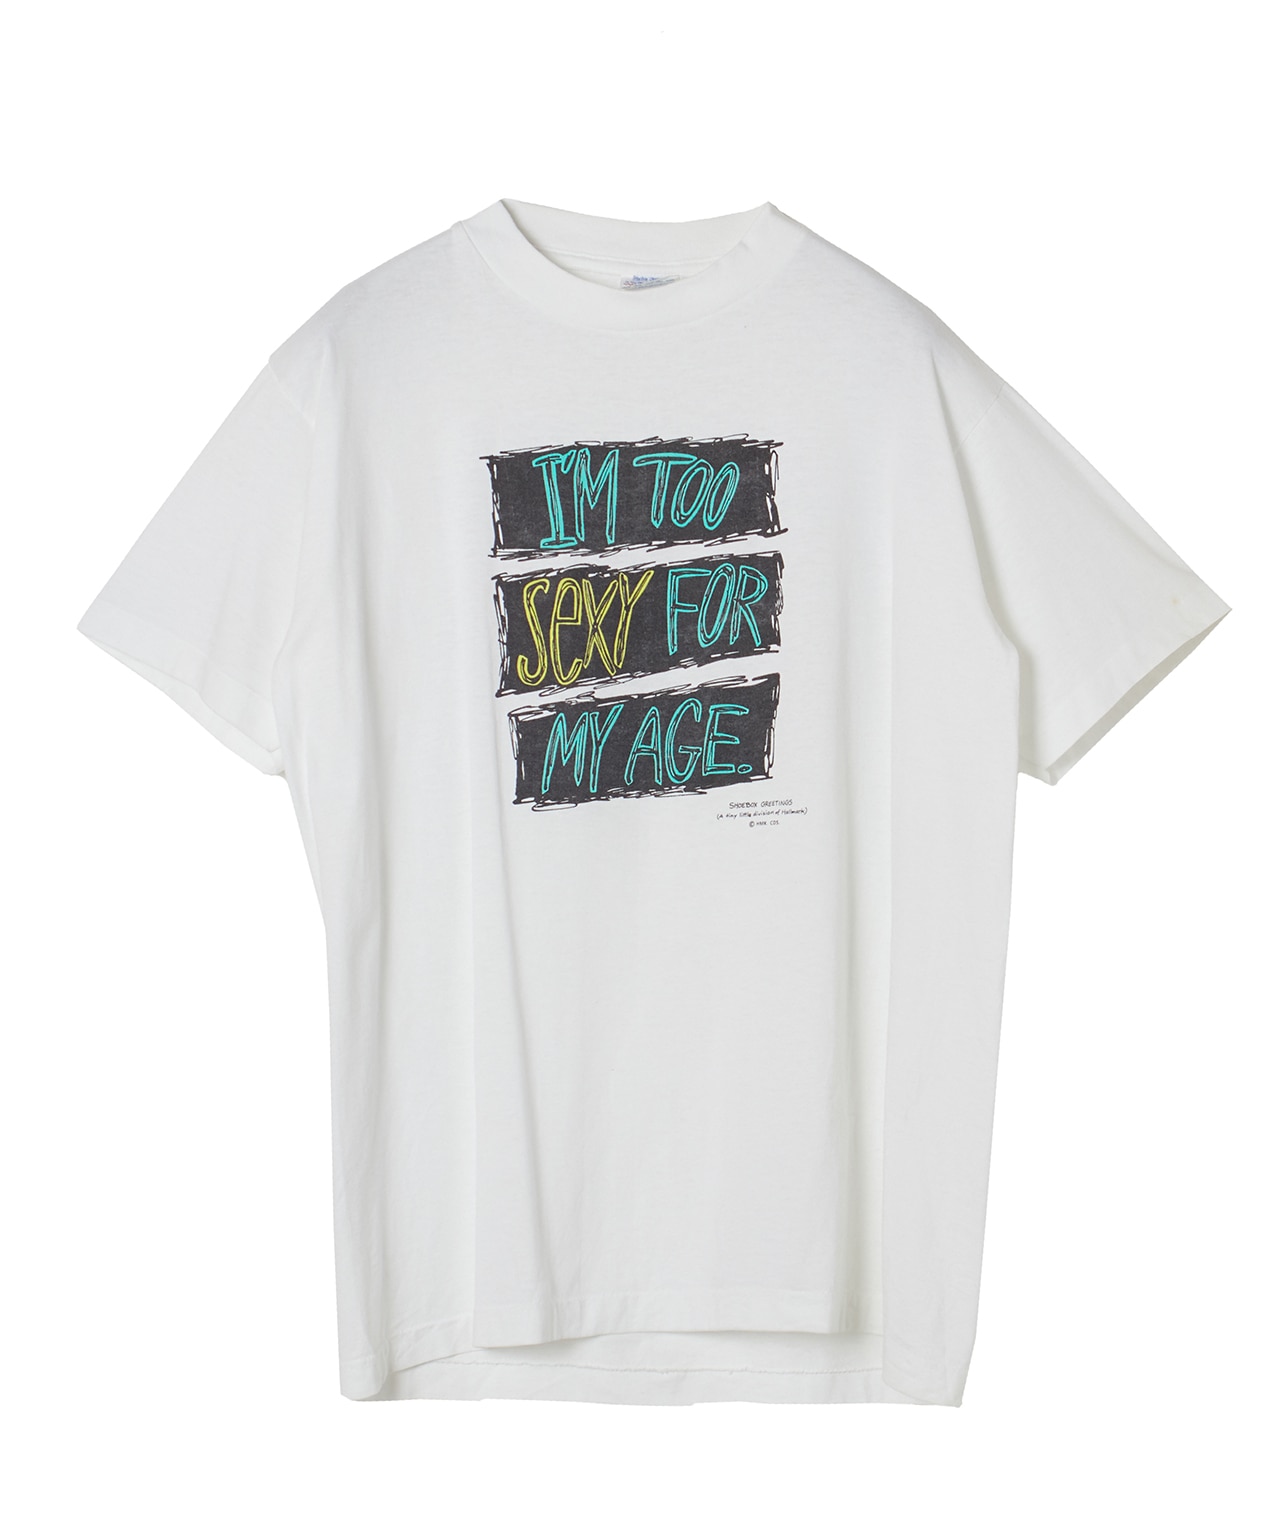 USED/I'M TOO SEXY FOR MY AGEプリントTシャツ 詳細画像 ホワイト 1